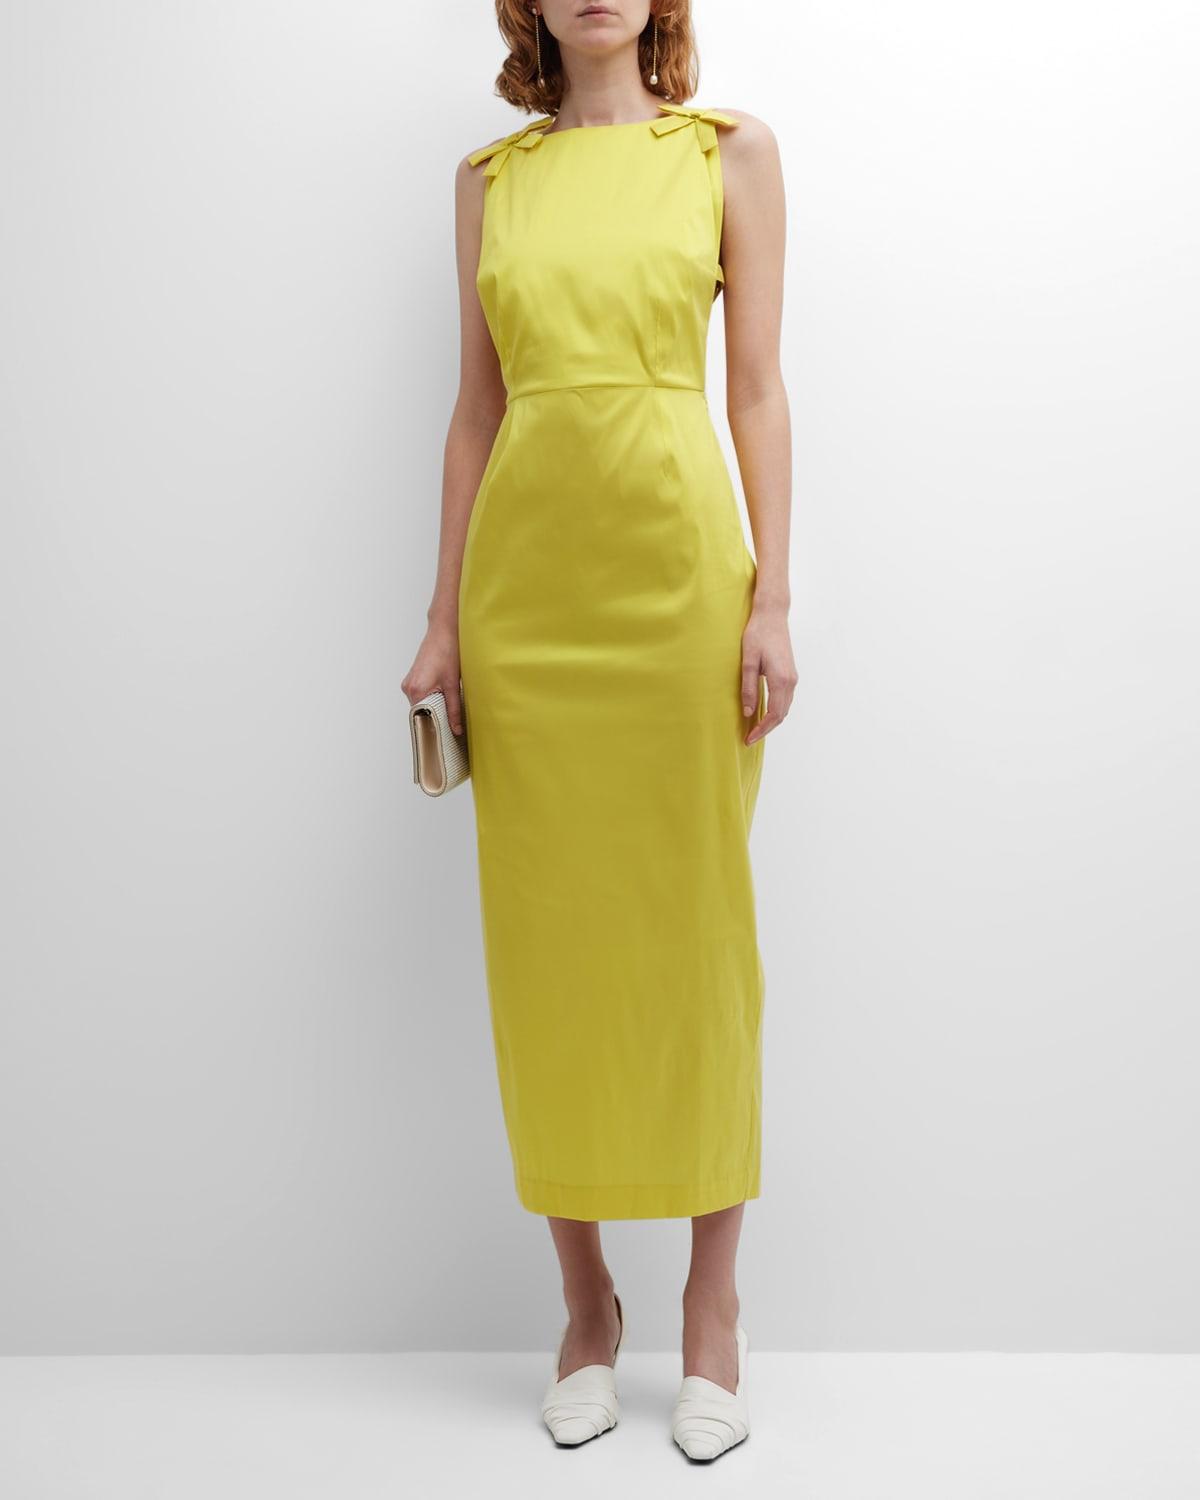 BERNADETTE Kim Midi Dress With Bow Details in Yellow | Lyst